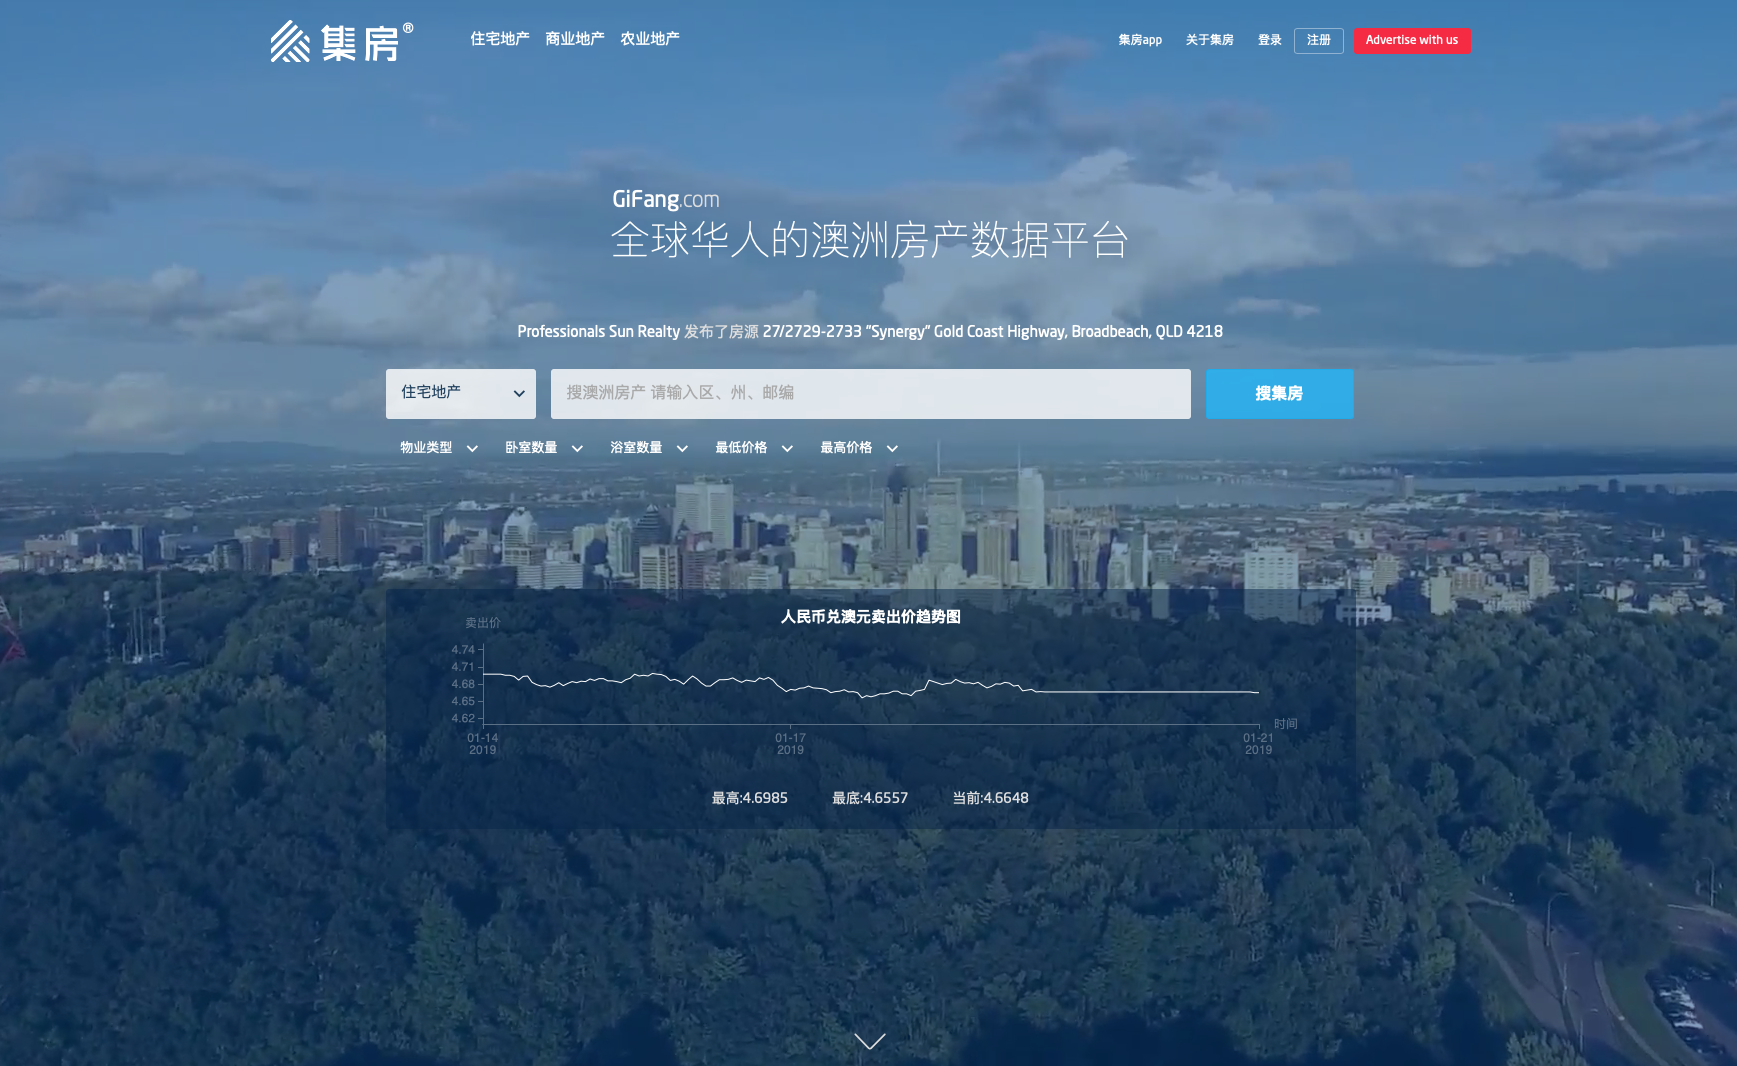 GIFANG PARTNERS WITH FIRST NATIONAL REAL ESTATE